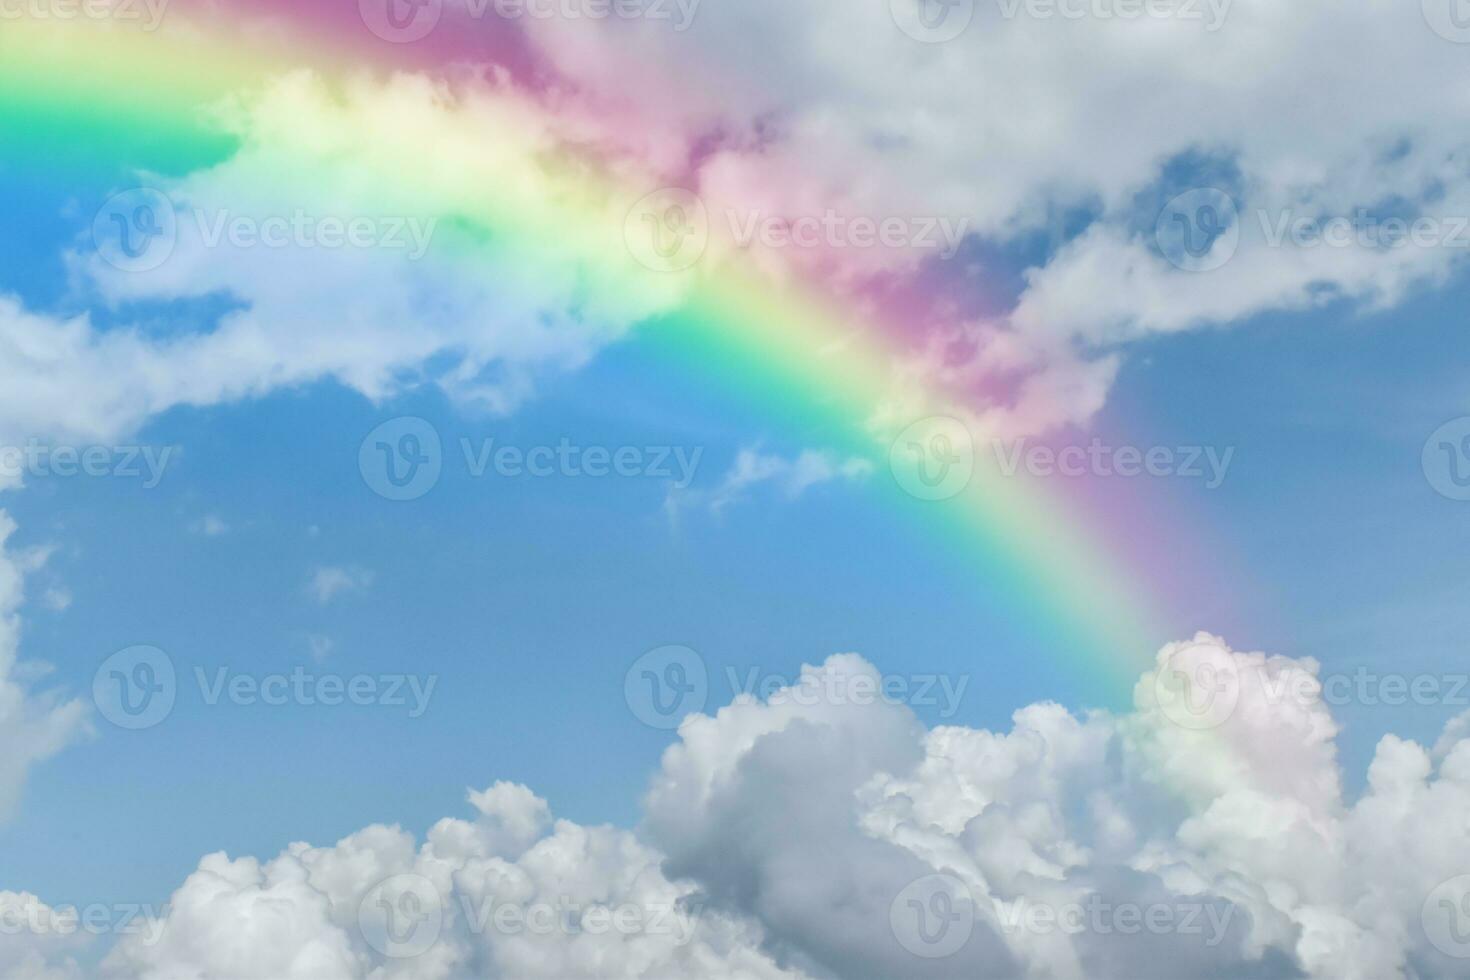 Rainbow on blue sky with white cloud background. photo